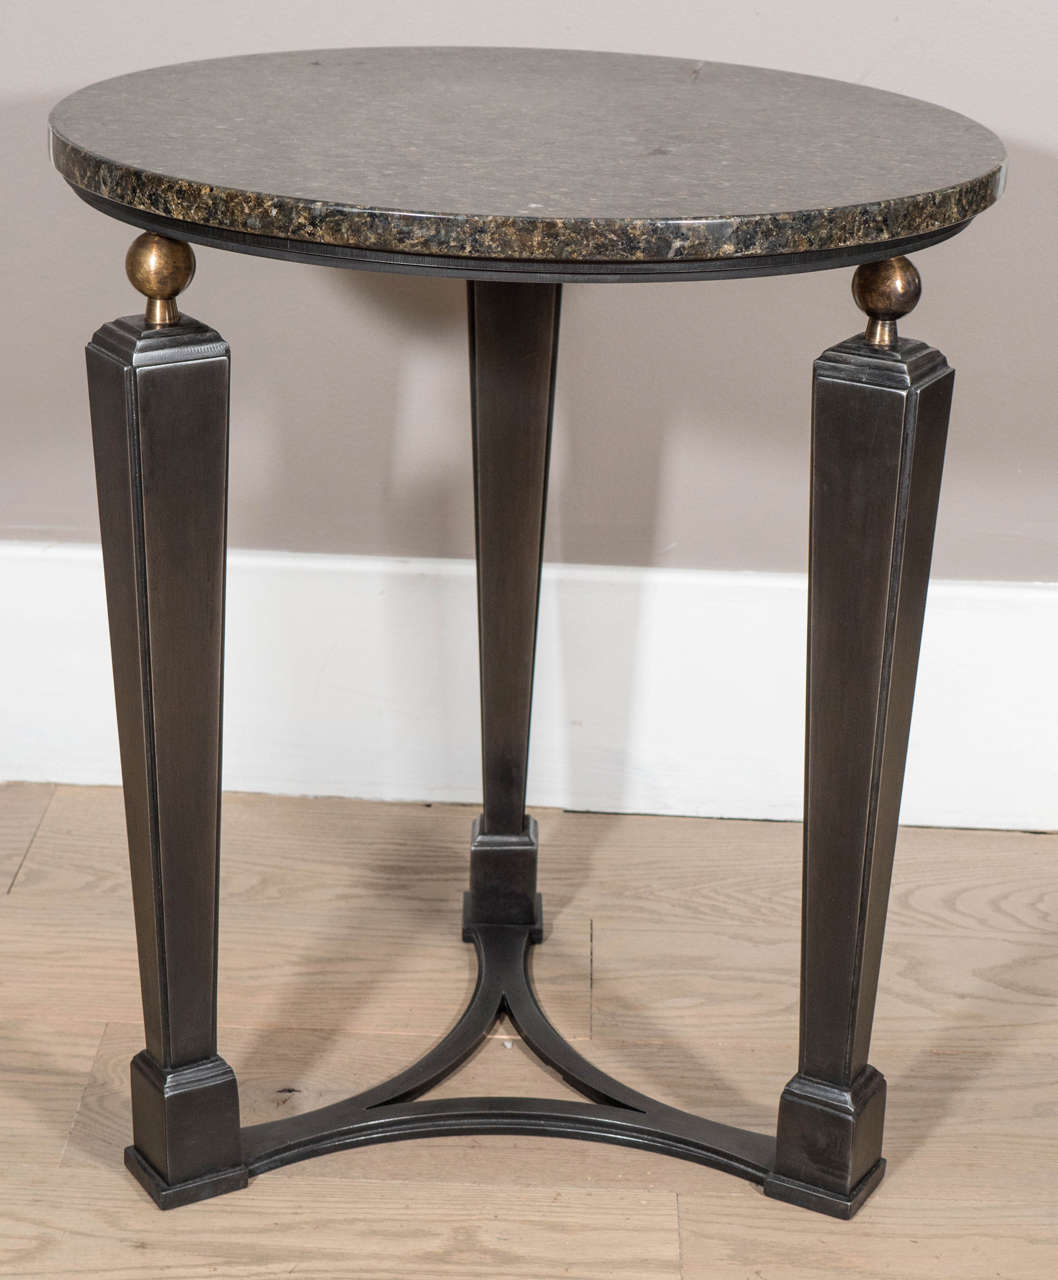 Circular Art Deco Inspired Three Legged Metal Side Table with Bronze Base For Sale 2